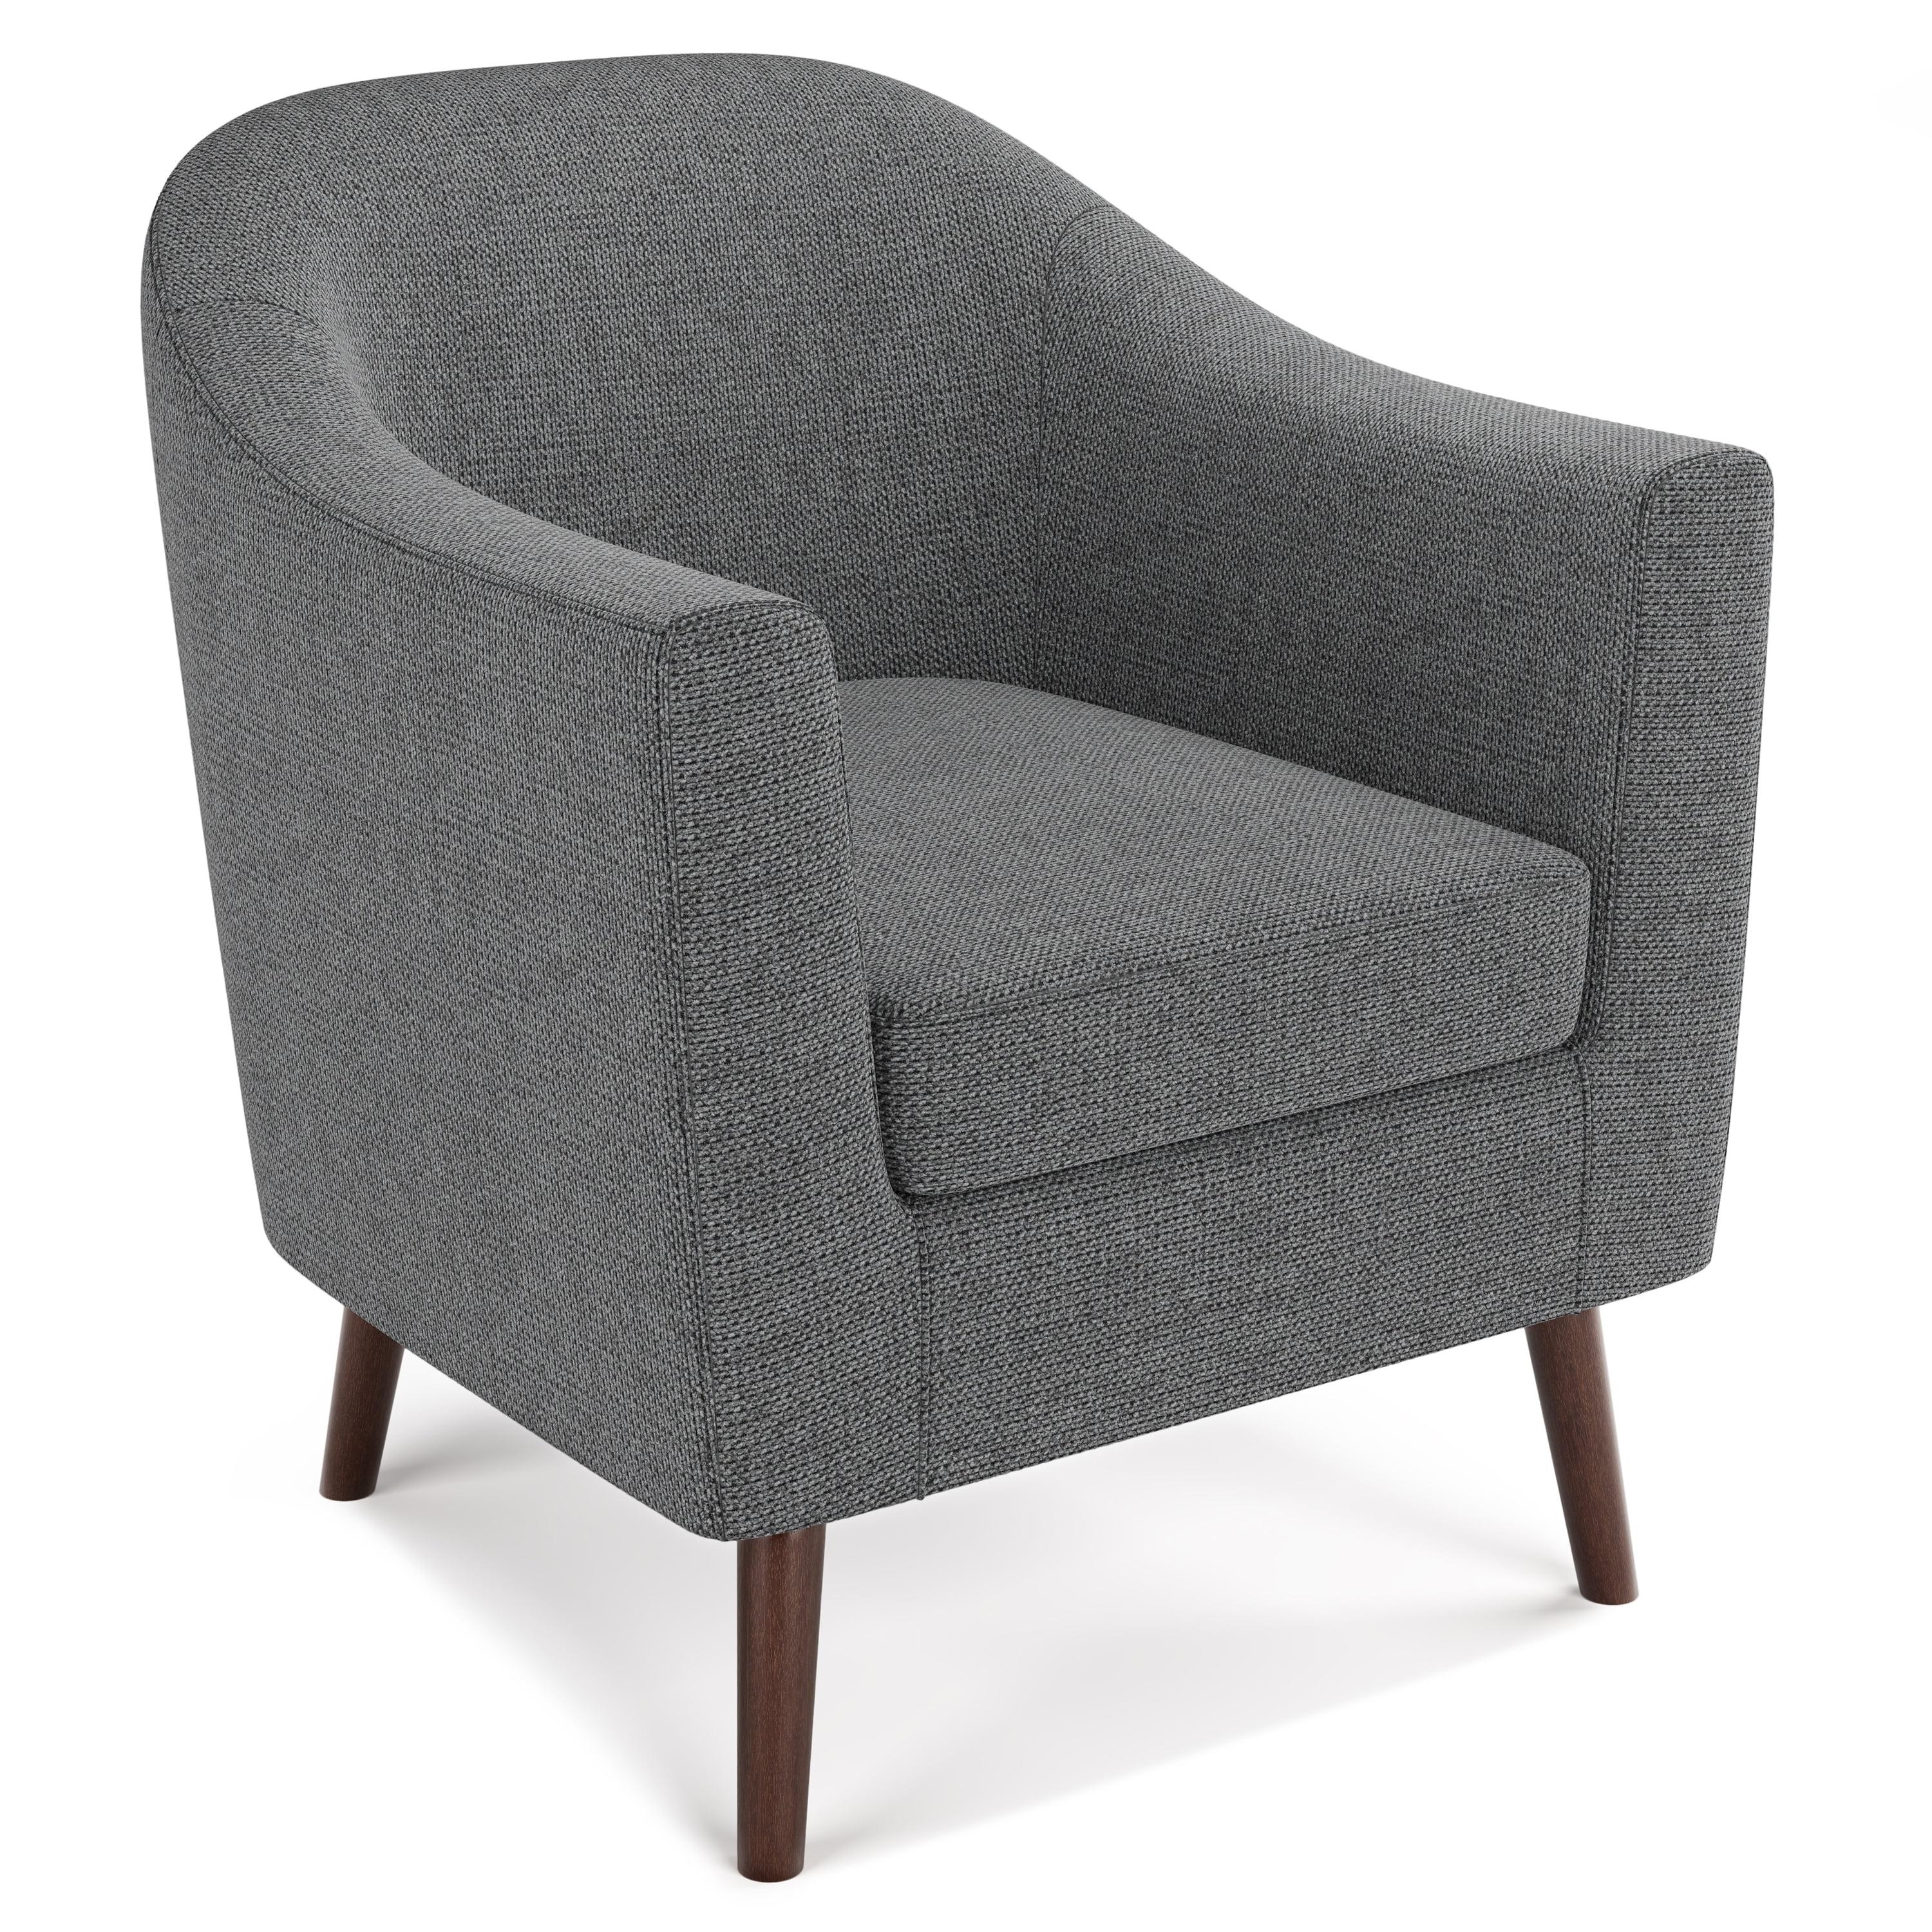 Transitional Shadow Grey Curved Accent Chair with Deep Seating